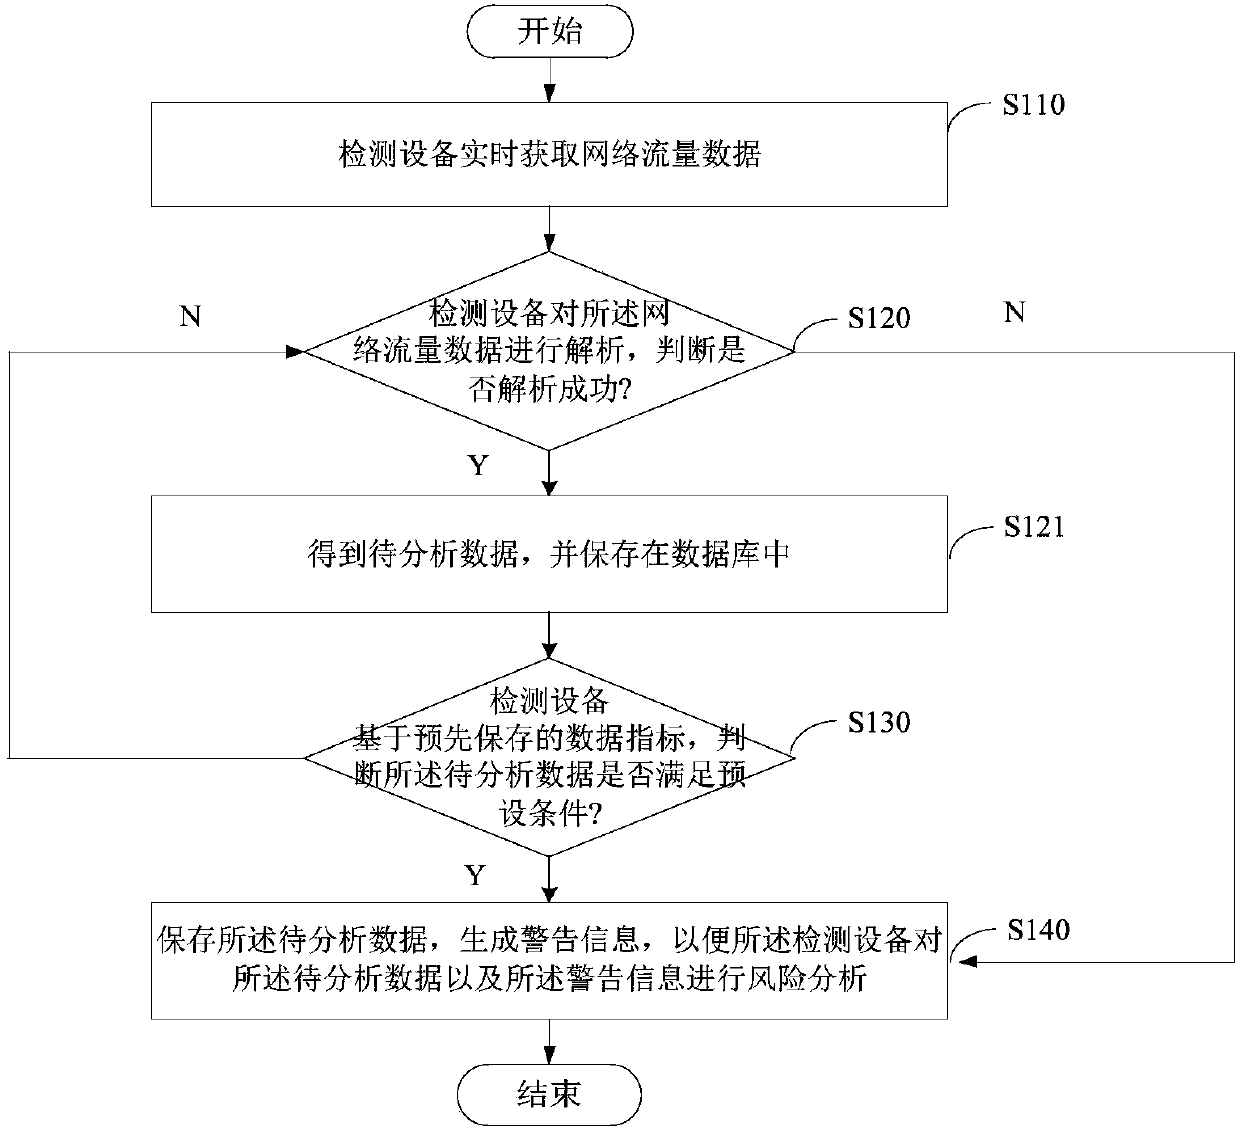 Cyber theft behavior detection method based on DNS traffic analysis and device